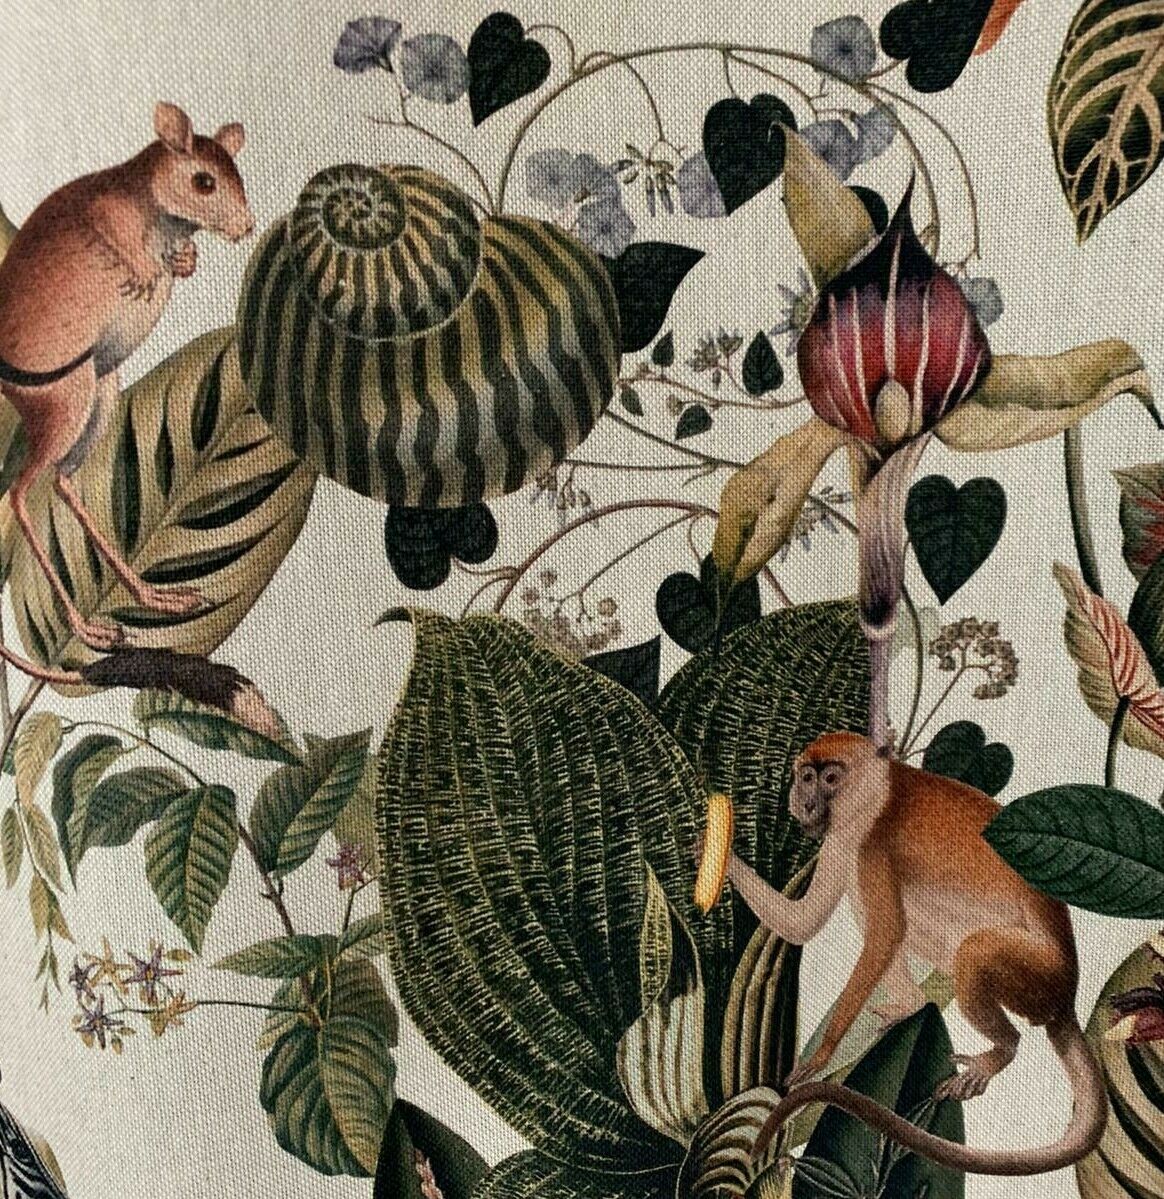 Jungle Kingdom Cotton Fabric By Meter Animals Sewing Material Monkey Zebra Leopard Pattern Textile Floral Tropical design for Pillows Cushions Crafts Curtains